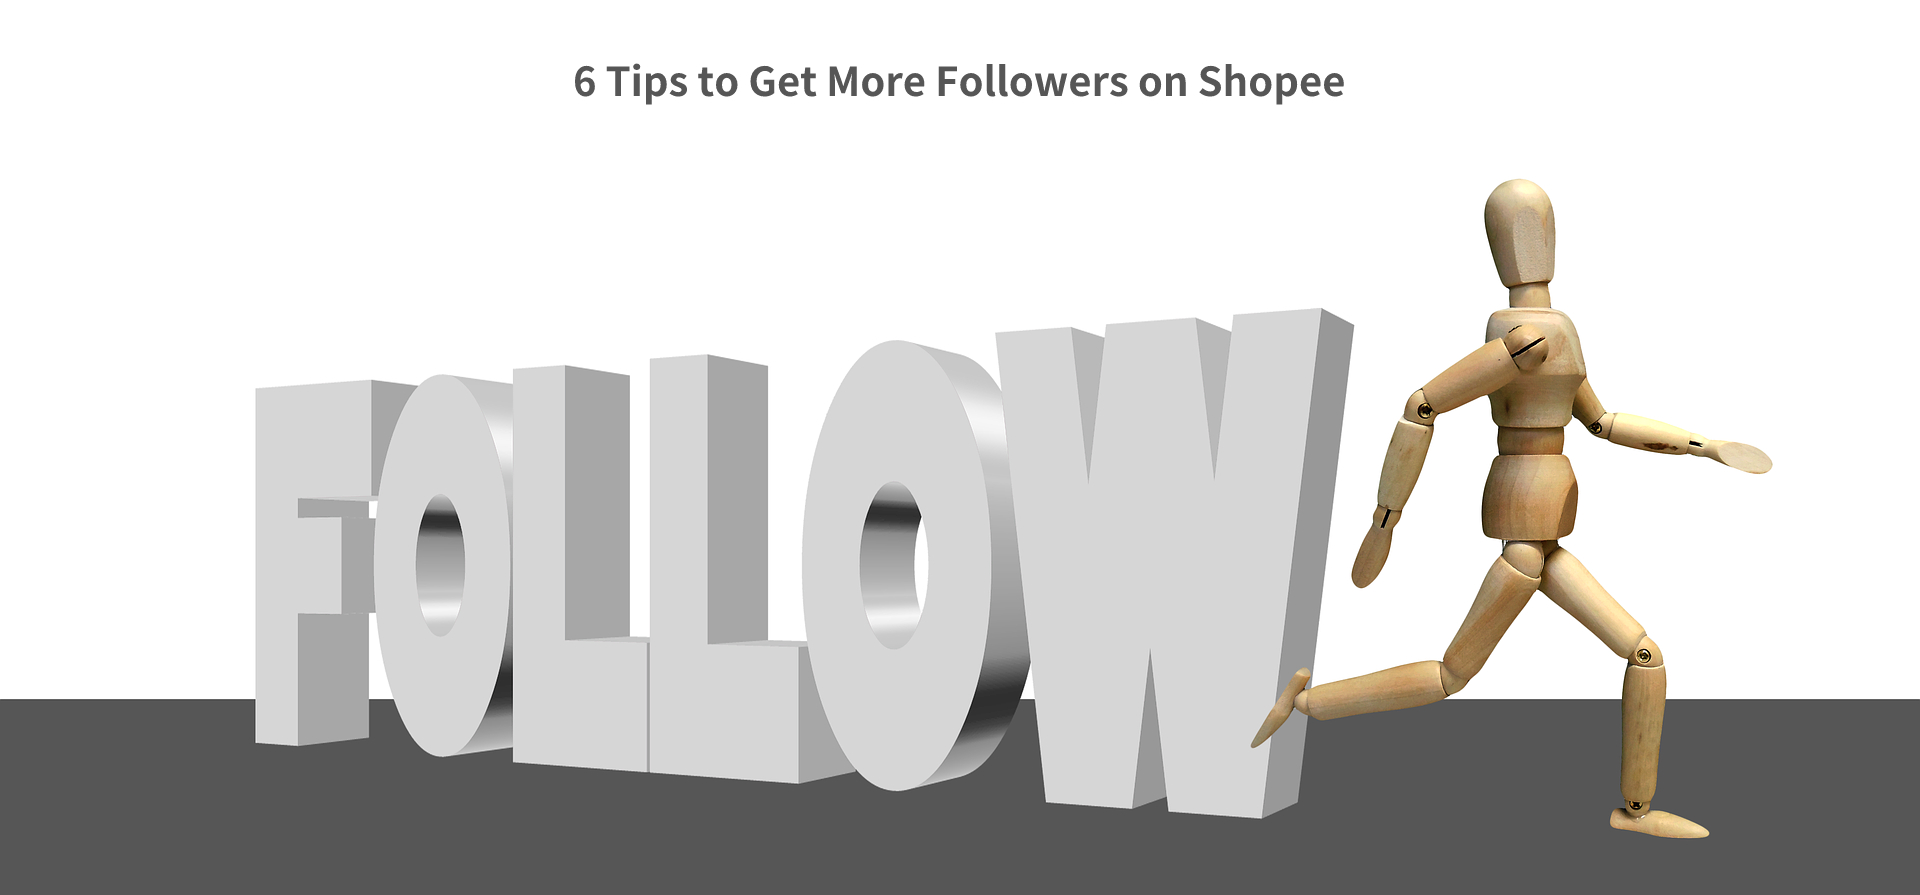 6 Tips to Get More Followers on Shopee